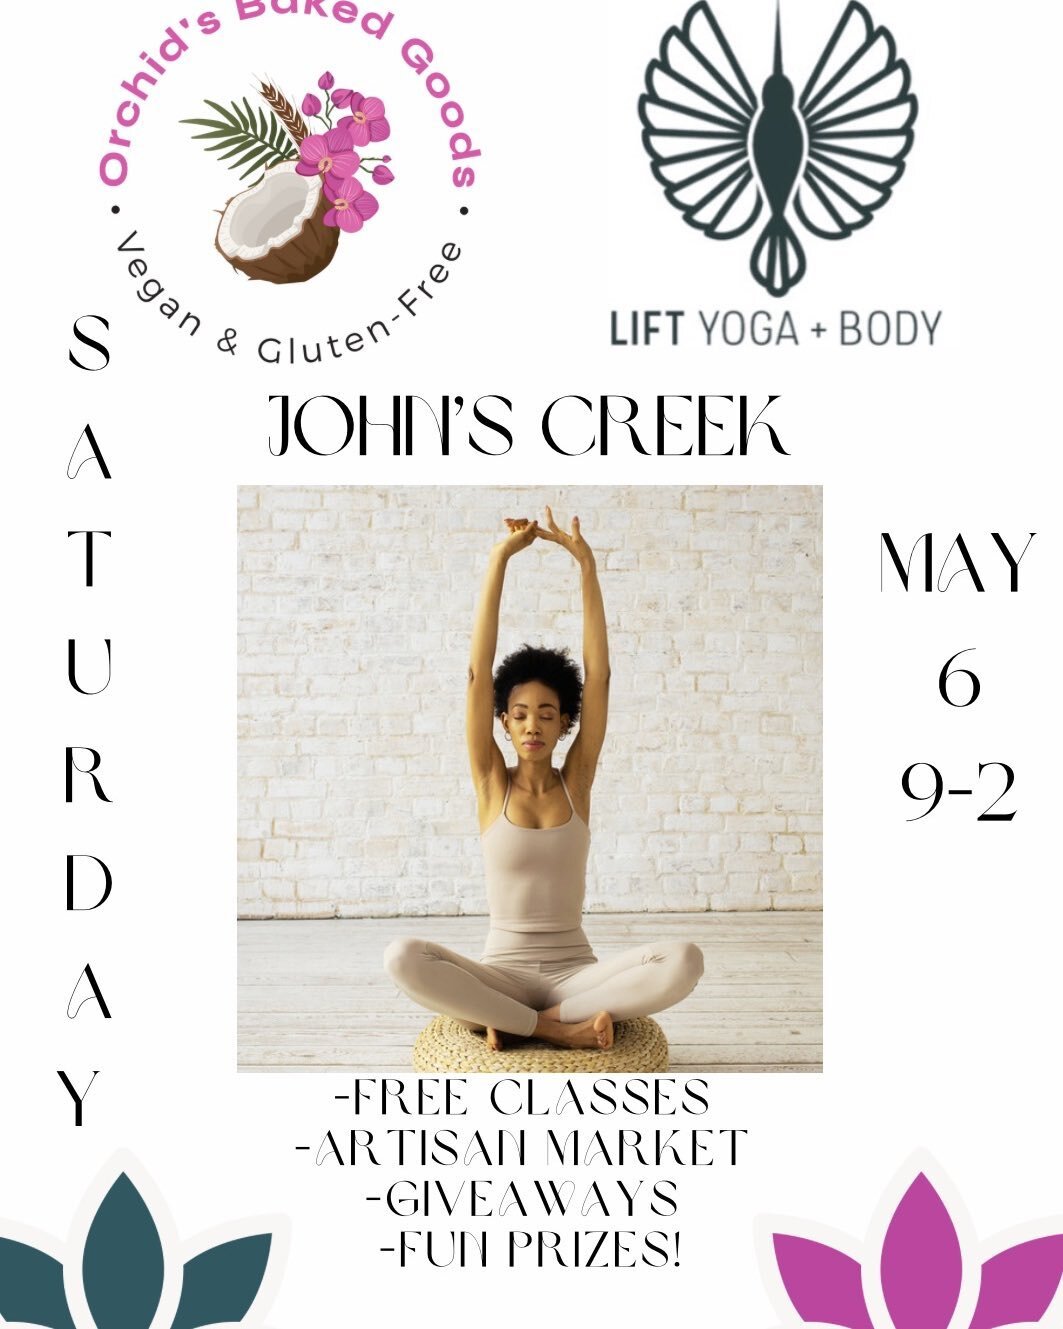 We are at the open house at Lift Yoga John&rsquo;s Creek on May 6th 9am-2pm. See you for an amazing zen time! #liftyoga #yogaopenhouse #openhousejohnscreek #liftyogaevent #orchidsbakedgoods #johnscreekevent